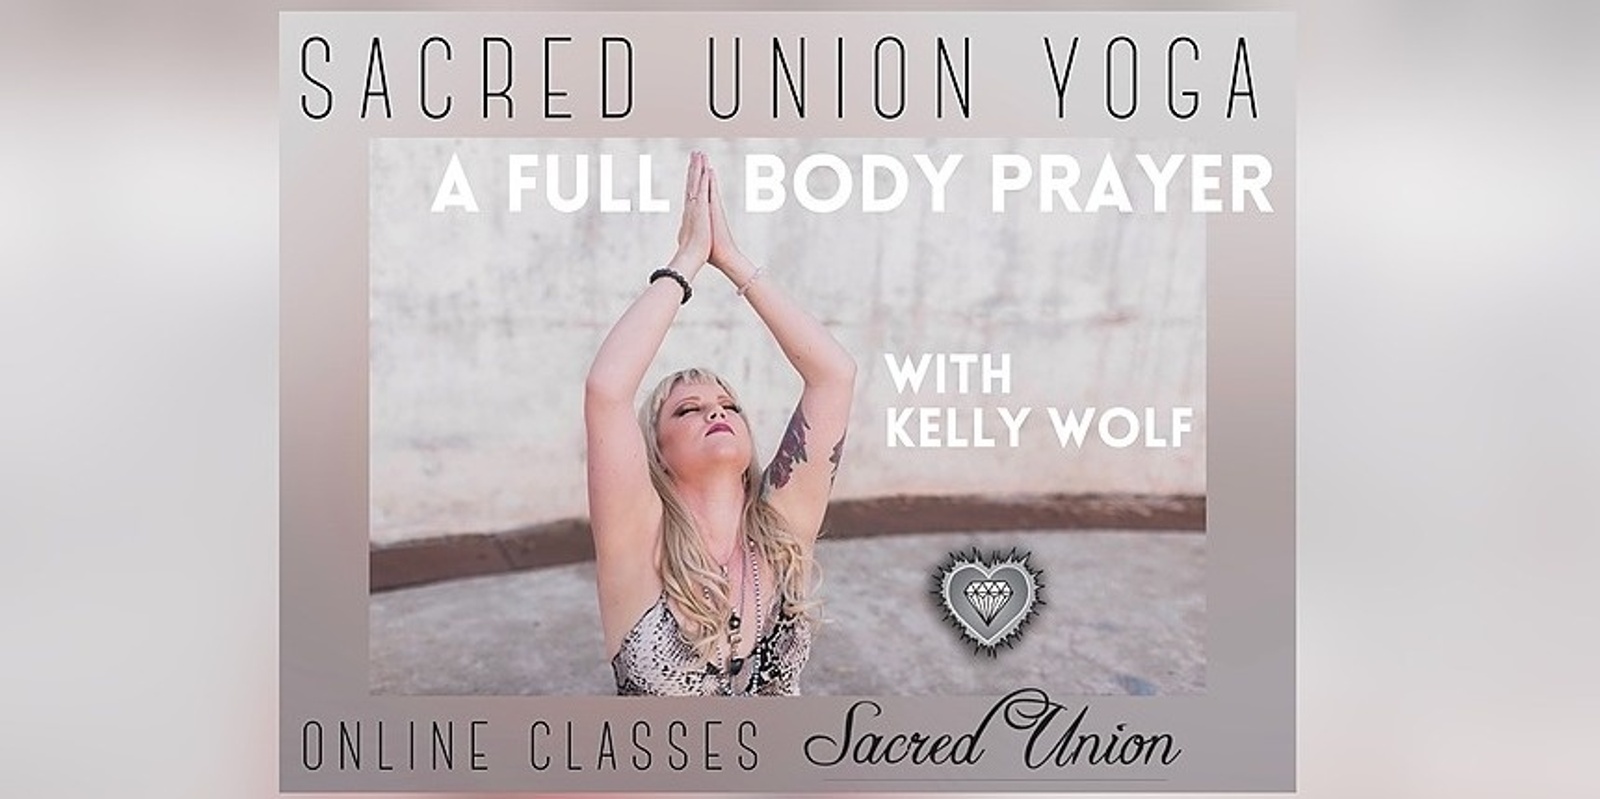 Banner image for Sacred Union Yoga - A full Body Prayer Online 5 week Class Series with Kelly Wolf